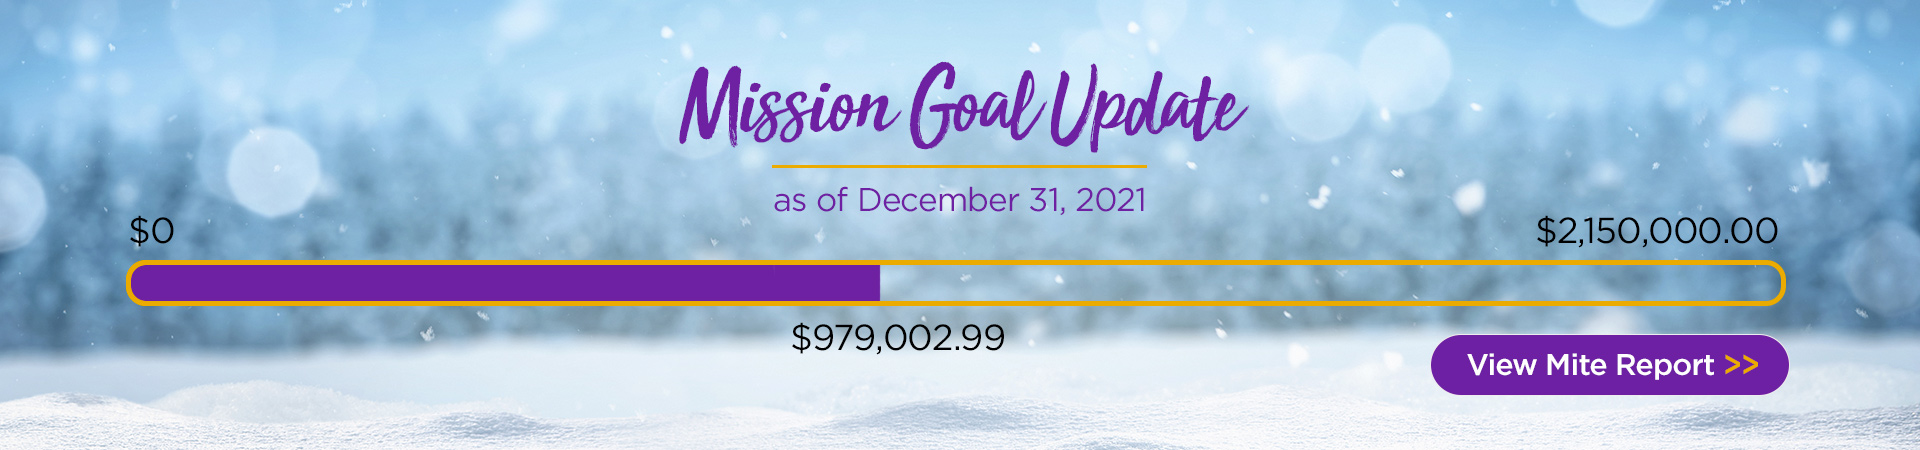 Mission Goal Update as of December 31, 2021. View Mite Report.